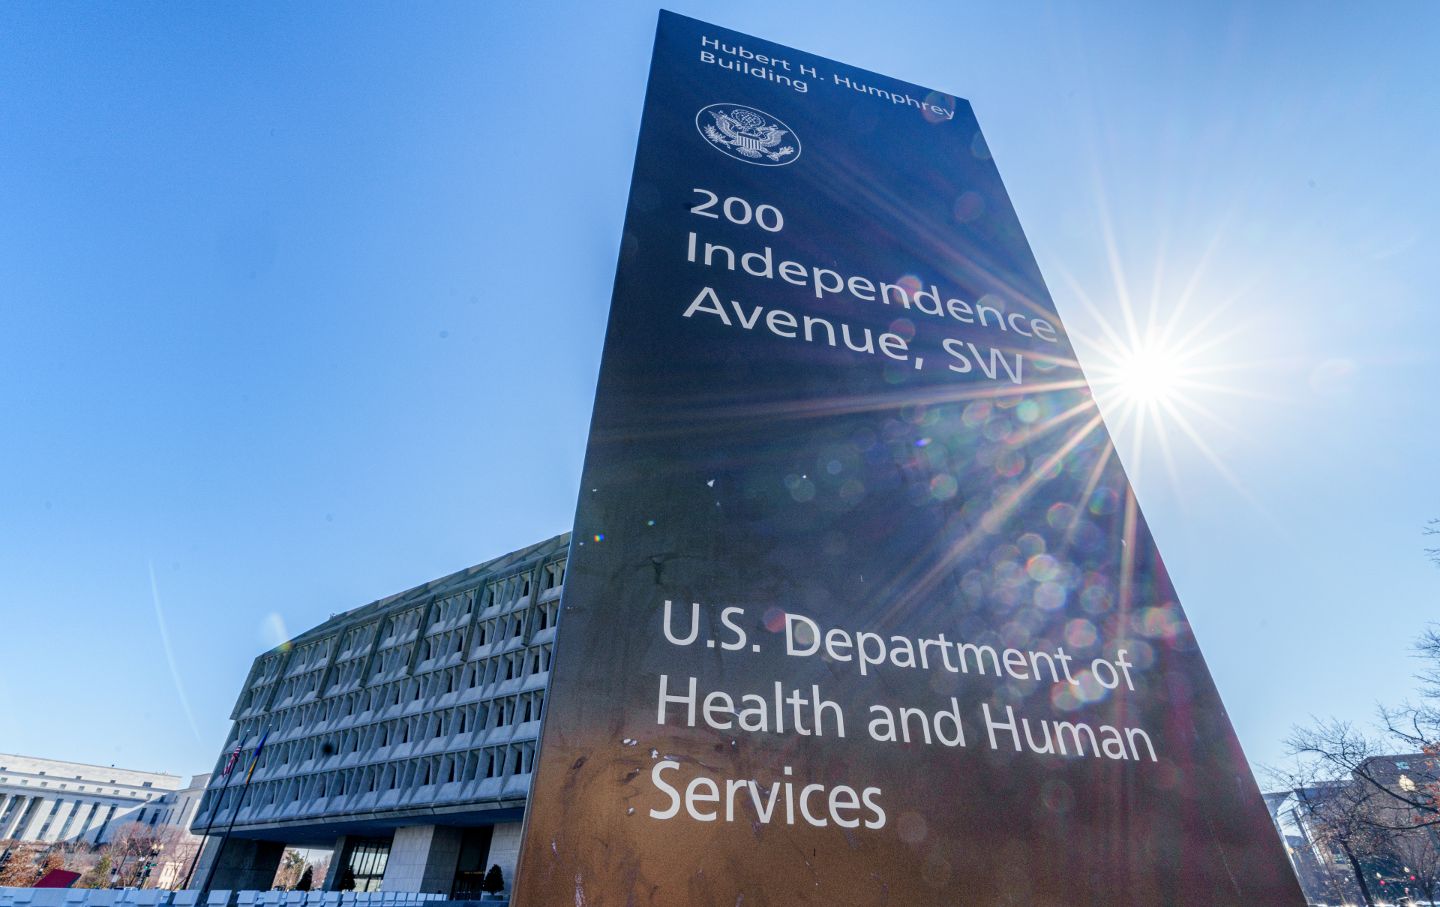 Looking up at the sign outside the Department of Health and Human Services building, against a sunny sky.